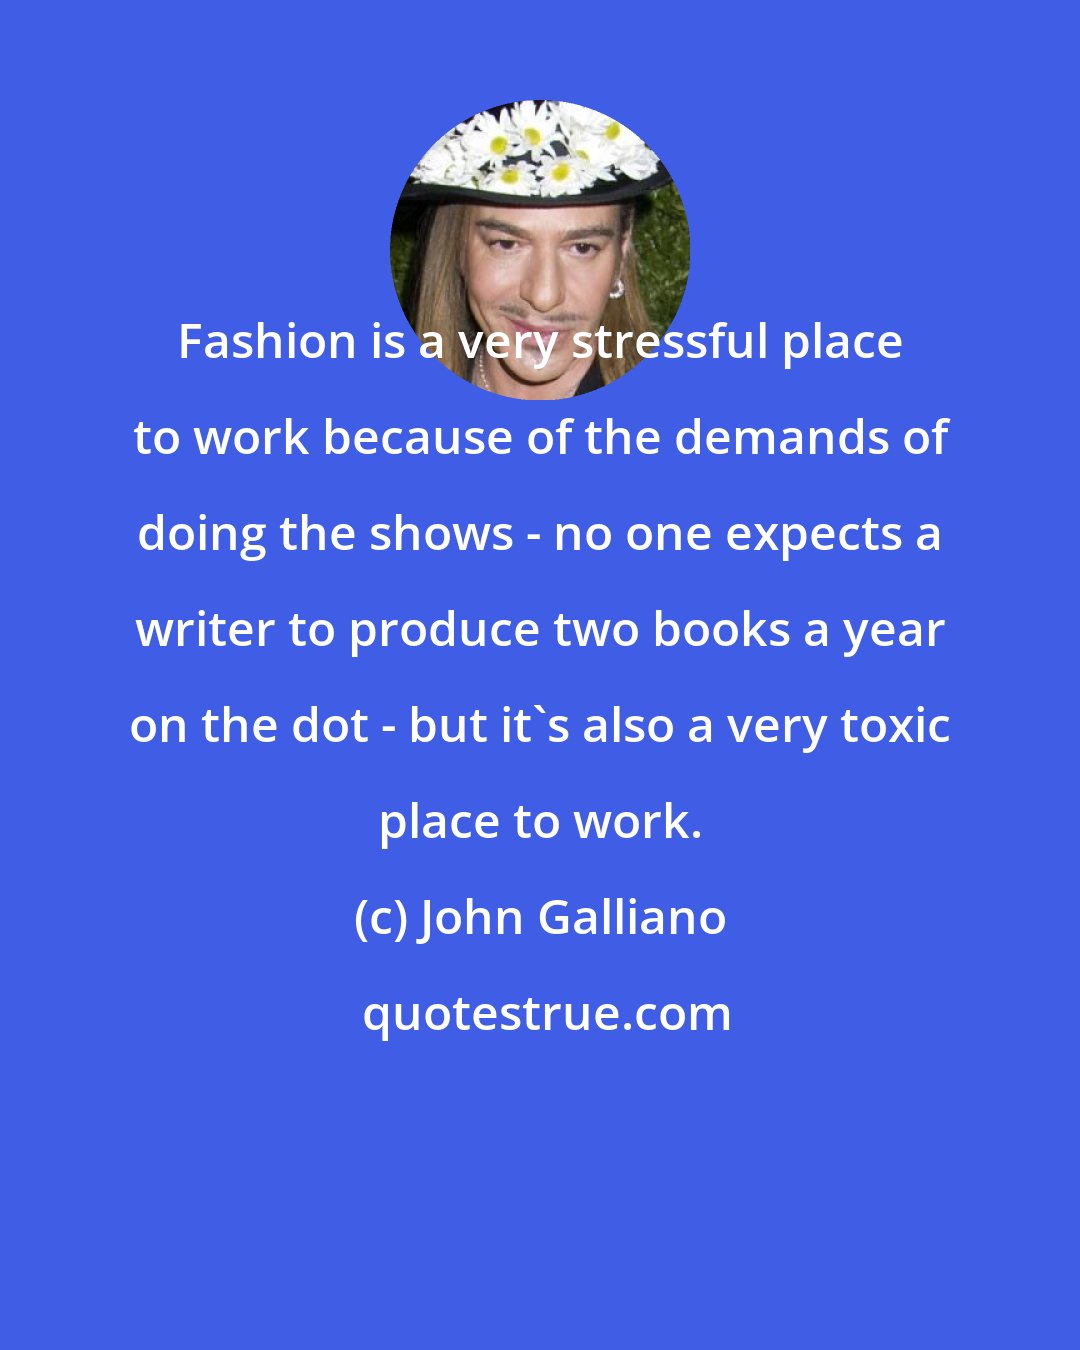 John Galliano: Fashion is a very stressful place to work because of the demands of doing the shows - no one expects a writer to produce two books a year on the dot - but it's also a very toxic place to work.